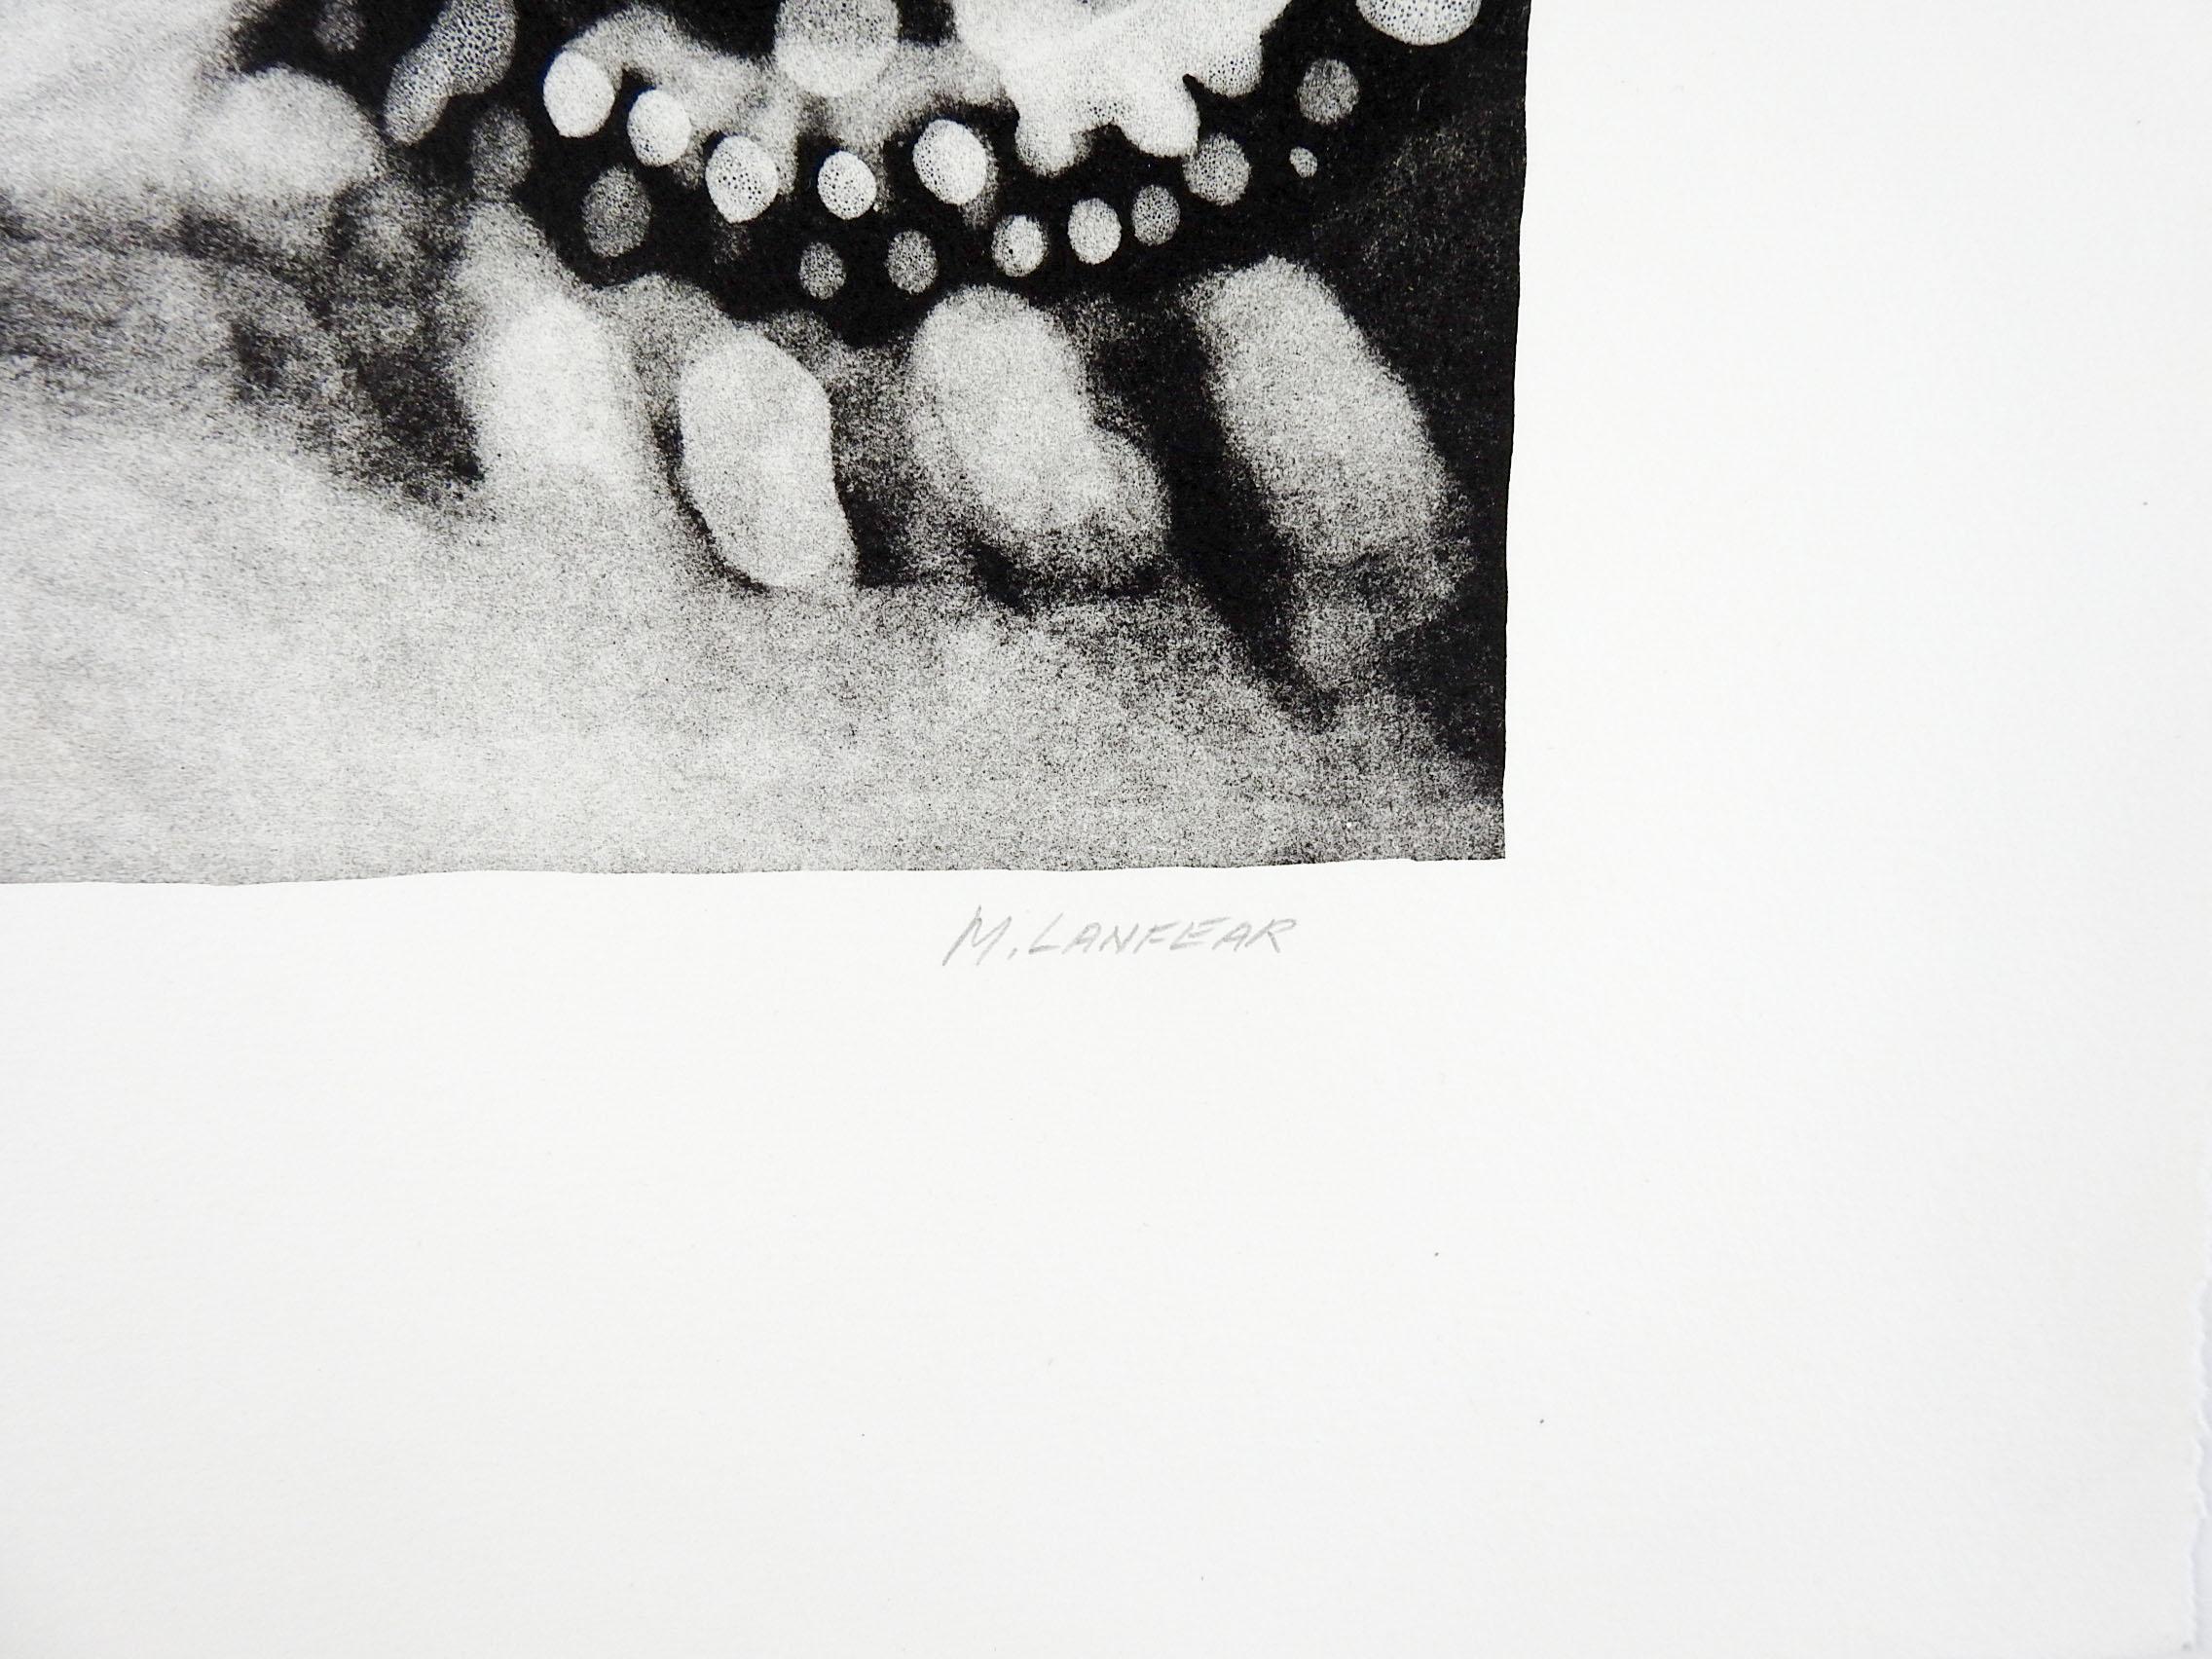 American Abstract Gears Lithograph by Marilyn Lanfear For Sale